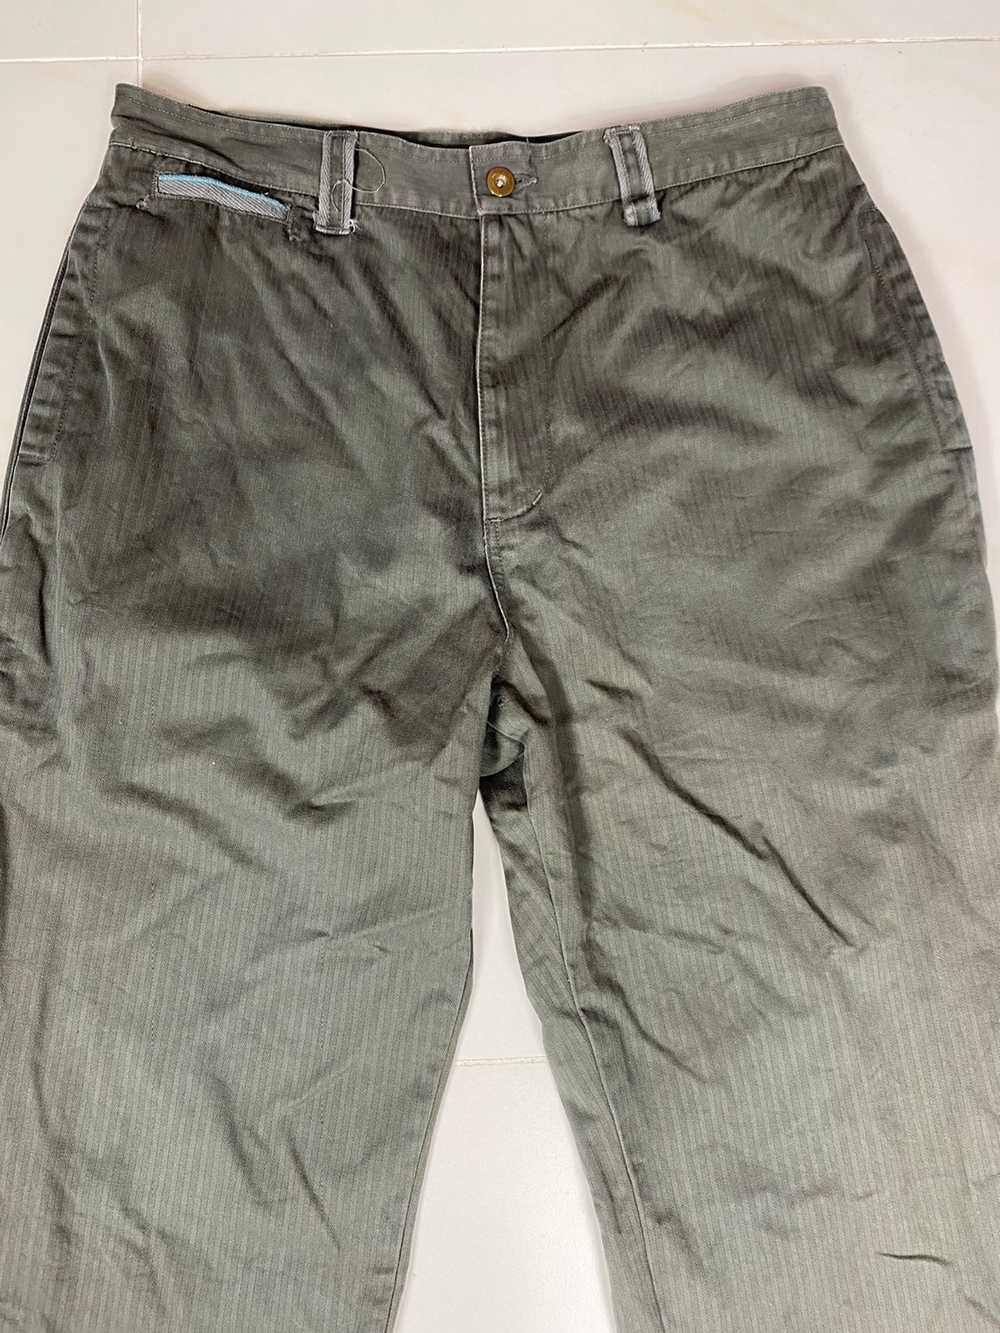 Japanese Brand - Mad Hectic Trousers Pants. S0150 - image 3